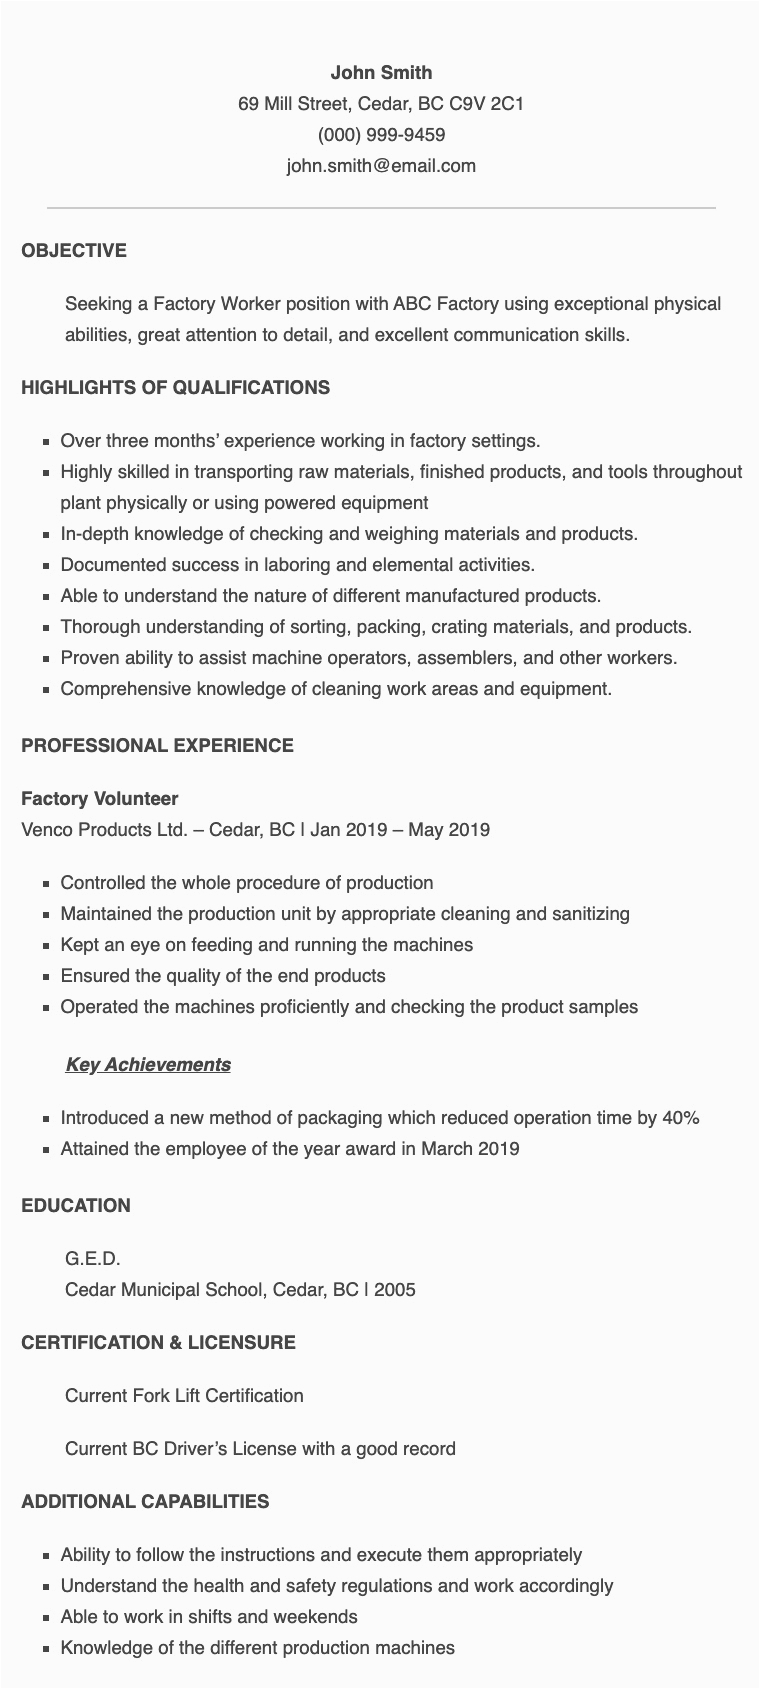 Sample Resume Philippines with Work Experience Resume Samples for Factory Worker Applicant In the Philippines